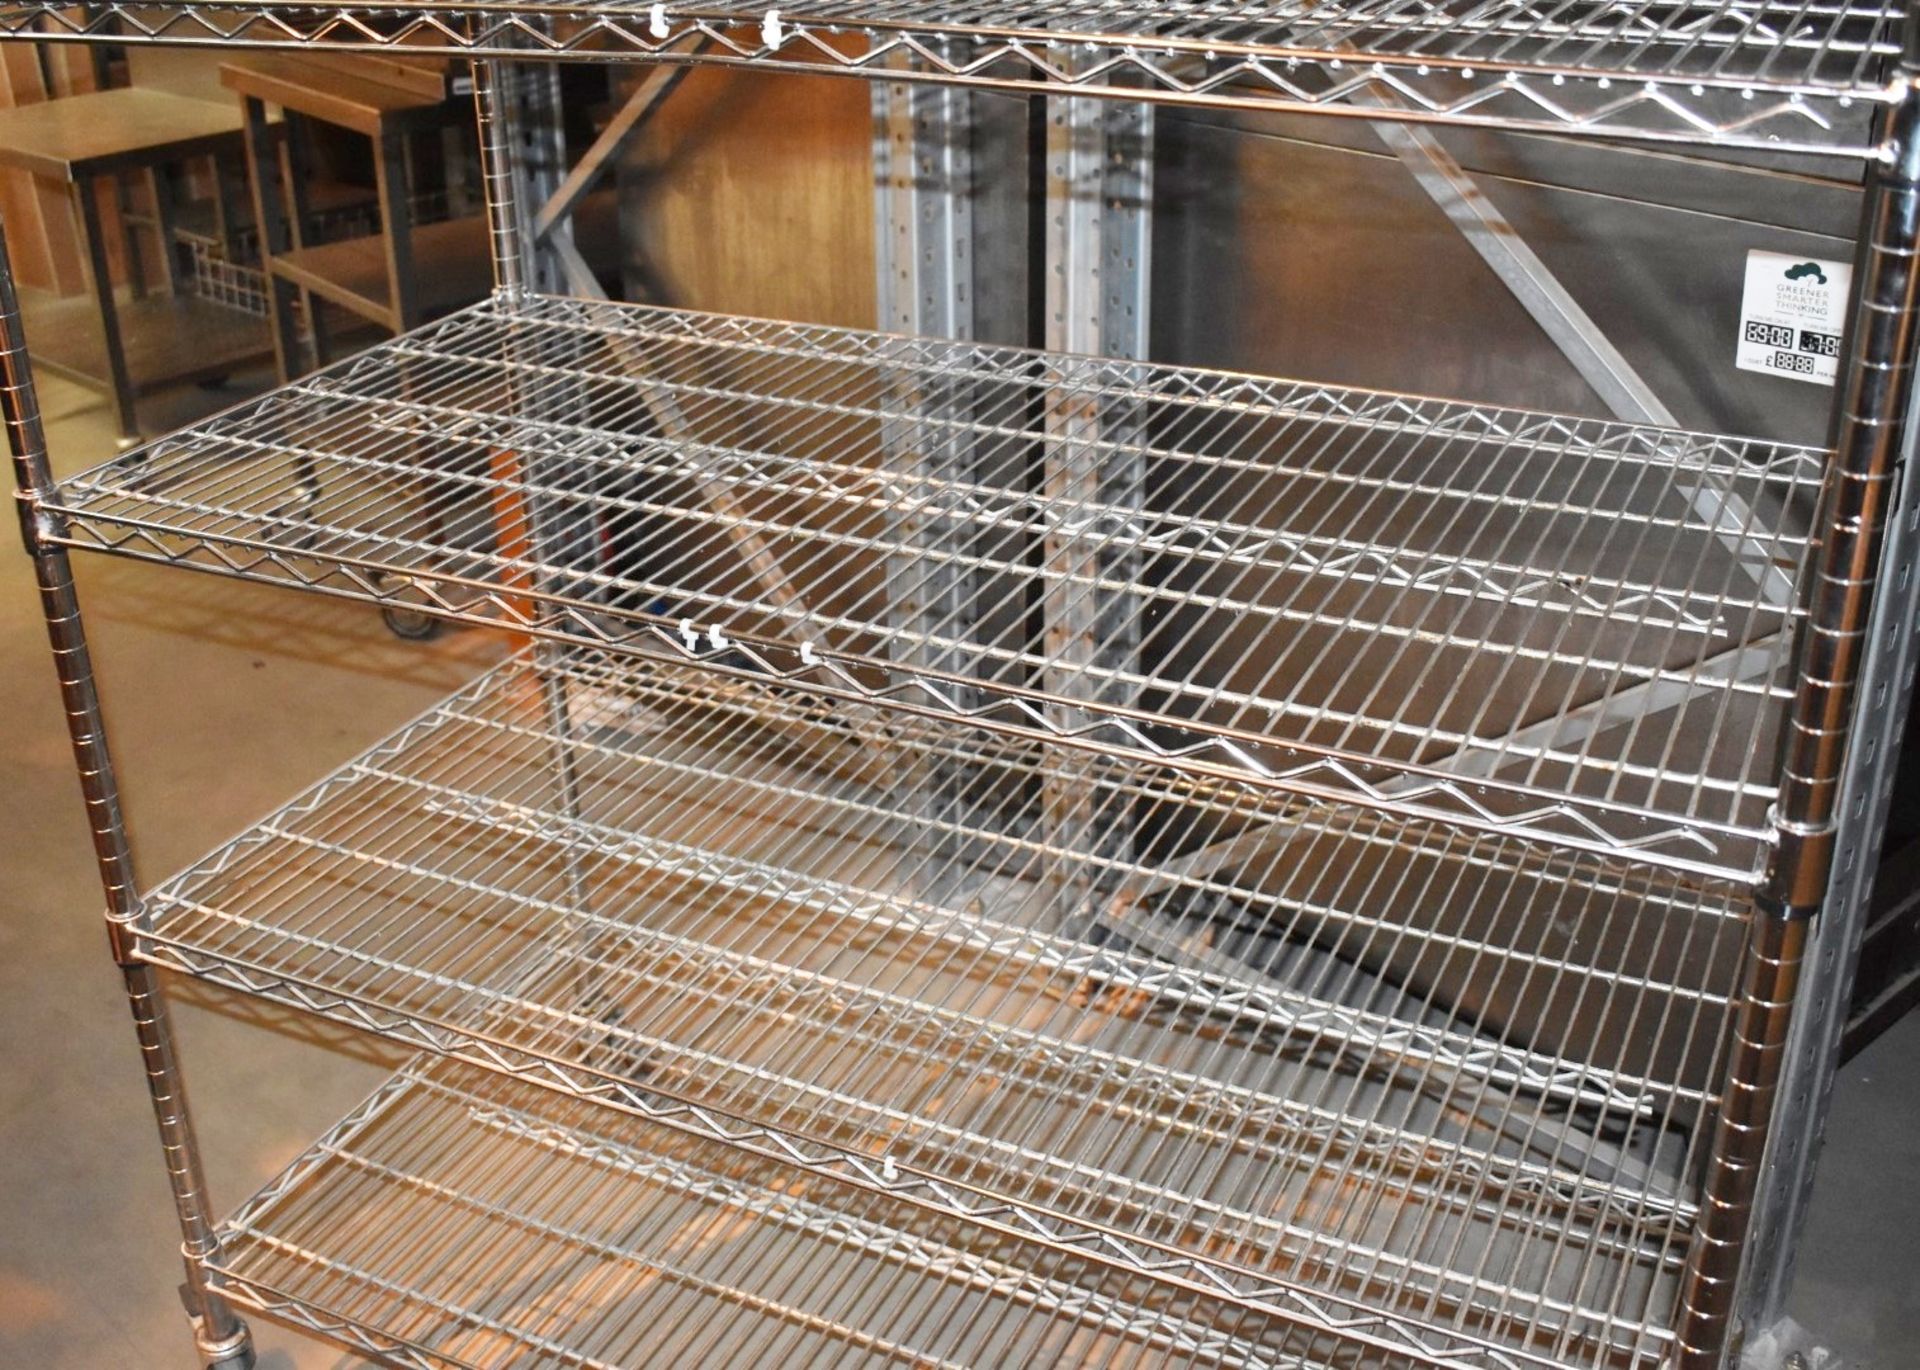 1 x Stainless Steel Commercial Wire Shelving Unit on Wheels - H175 x W120 x D60 cms - CL533 - Ref - Image 3 of 4